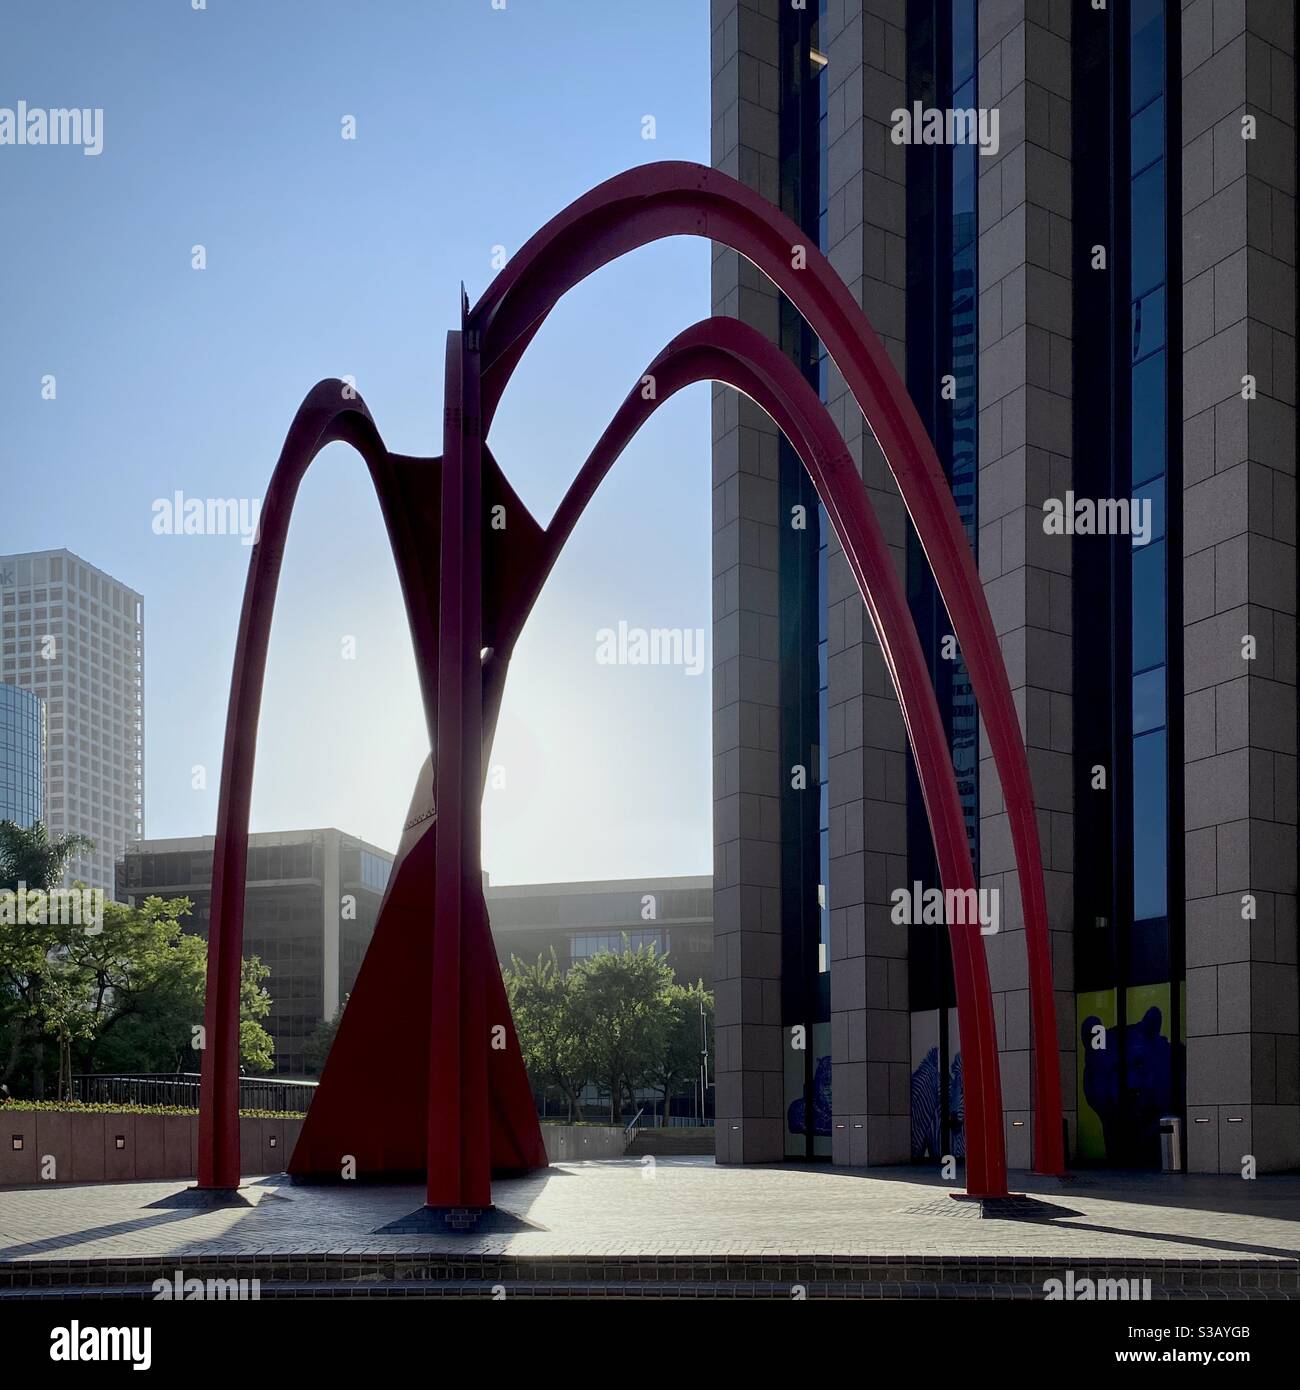 LOS ANGELES, CA, JUL 2020: bright red steel, Four Arches 'stabile' sculpture by Alexander Calder at Bank of America Plaza in Downtown Stock Photo